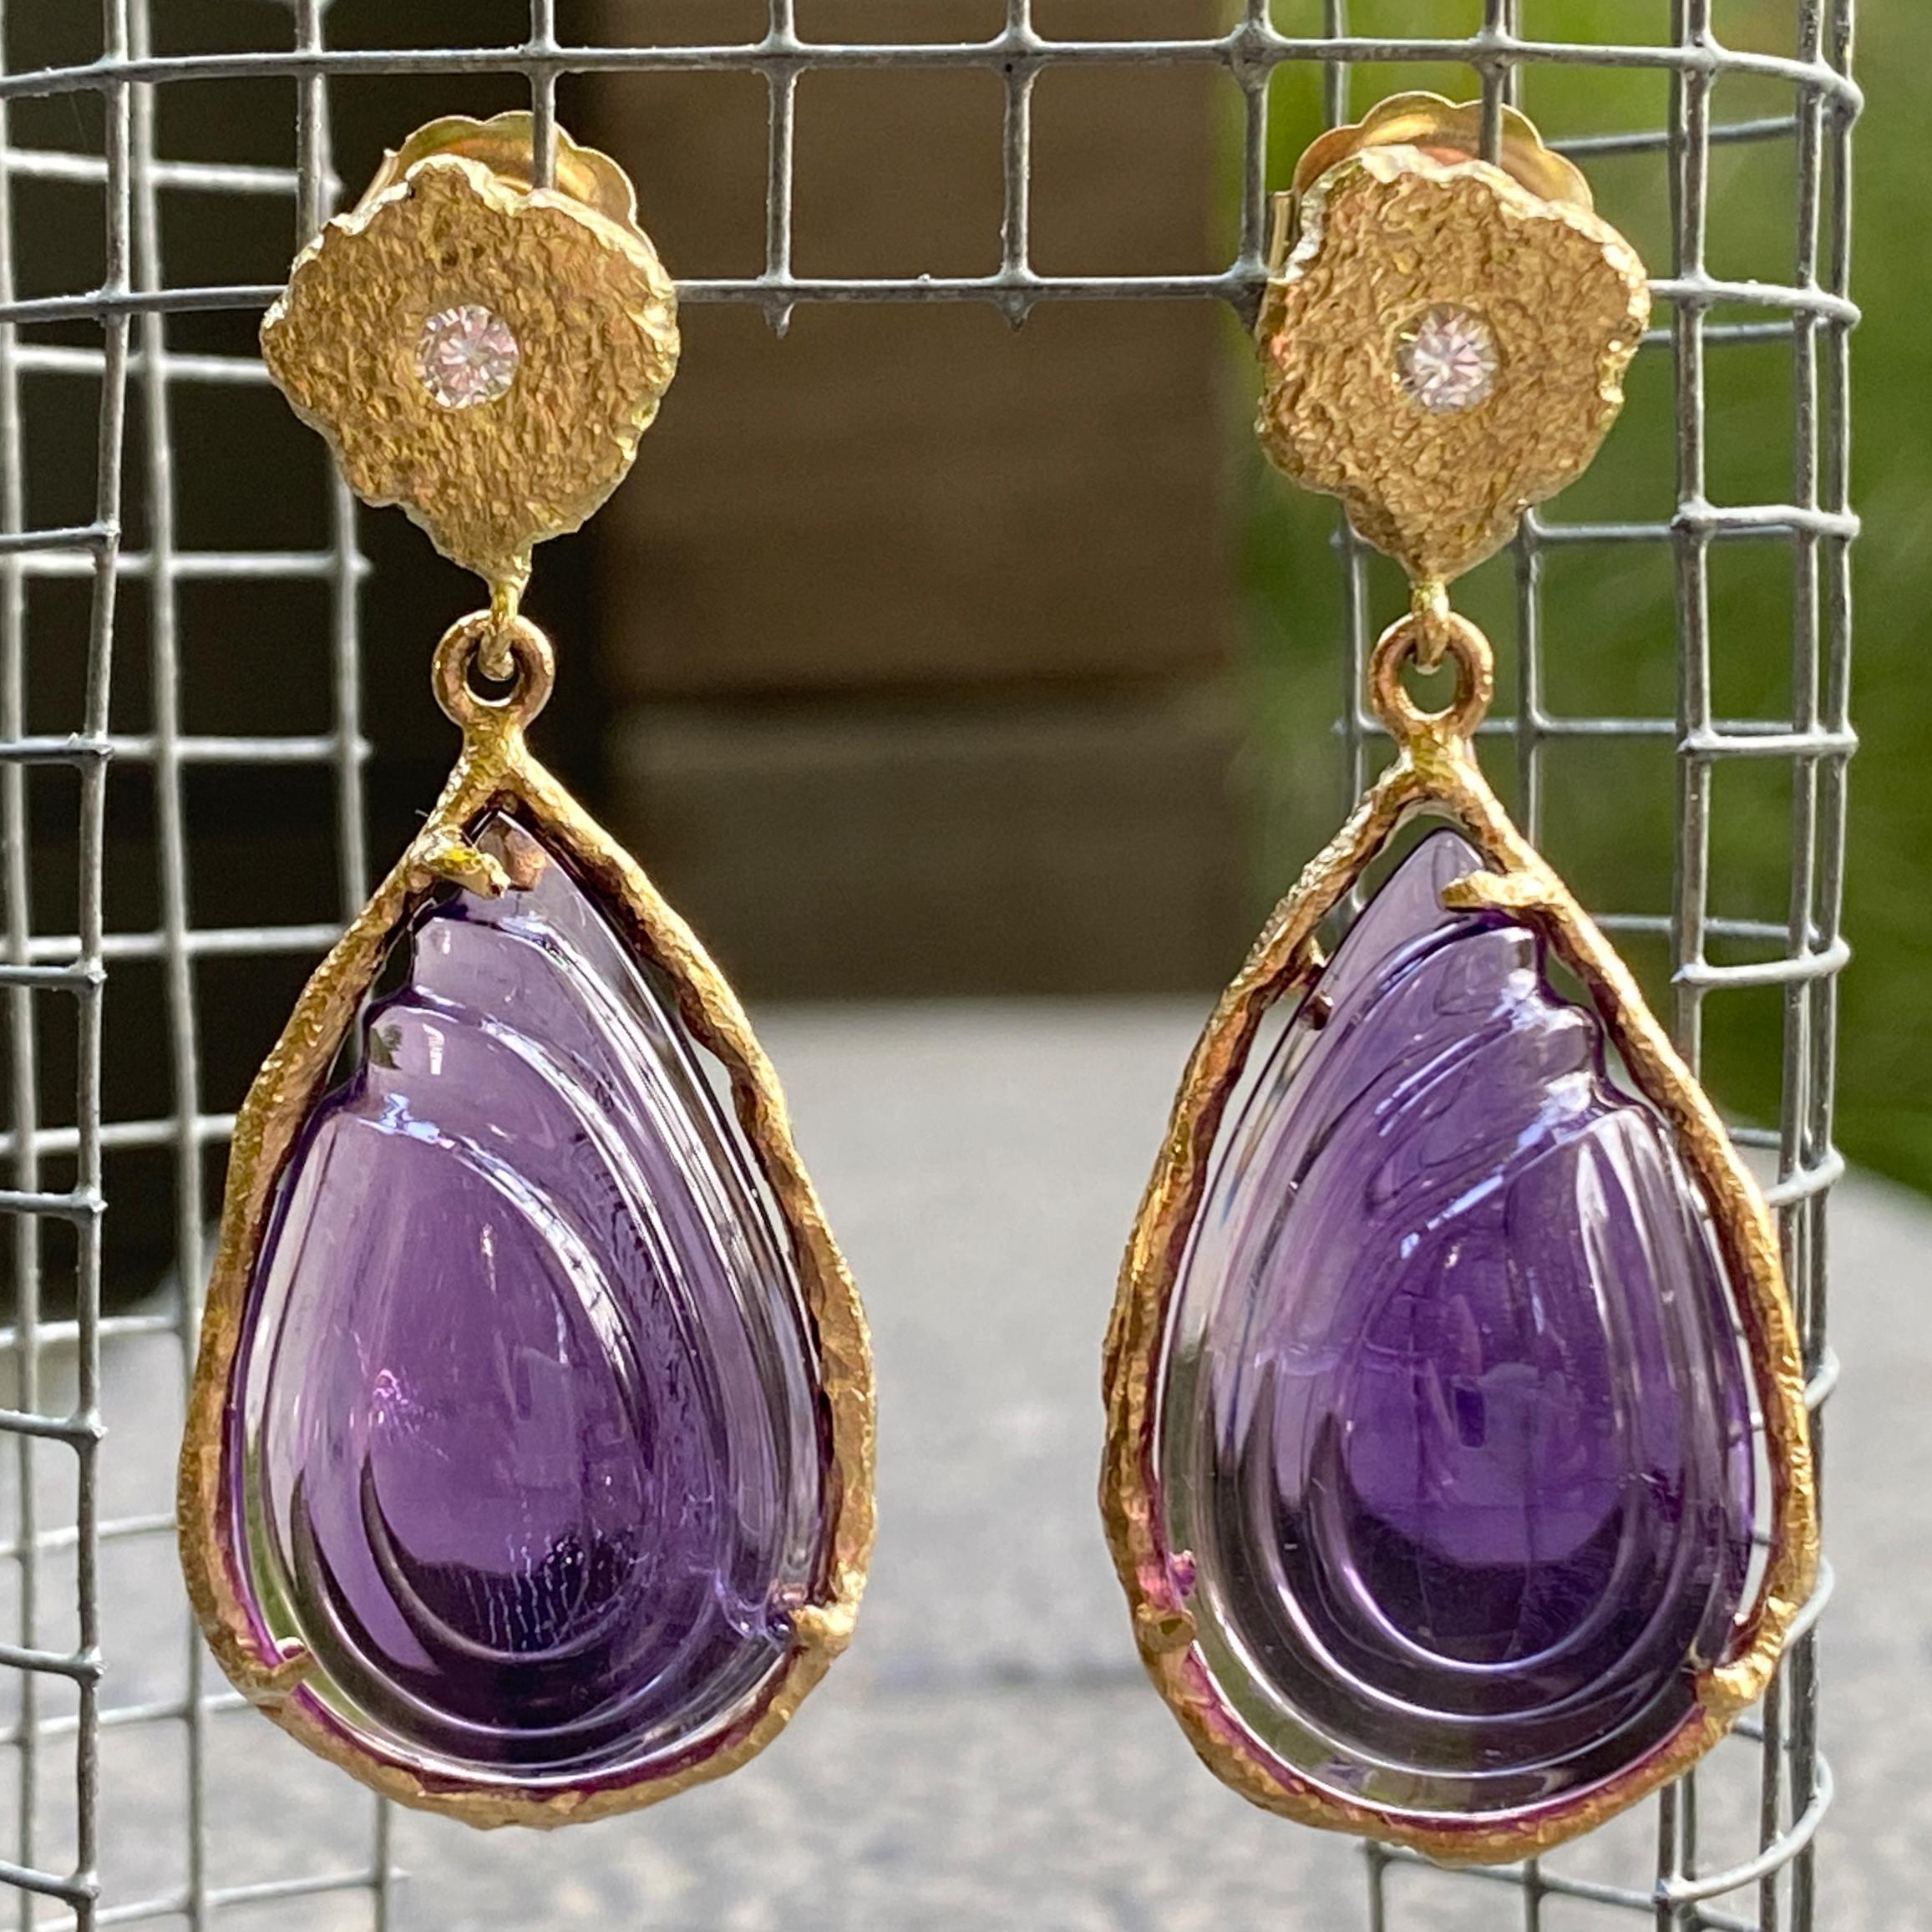 Carved Amethyst Teardrop Earrings in 18 Karat Gold with Diamond Accents In New Condition For Sale In Sherman Oaks, CA